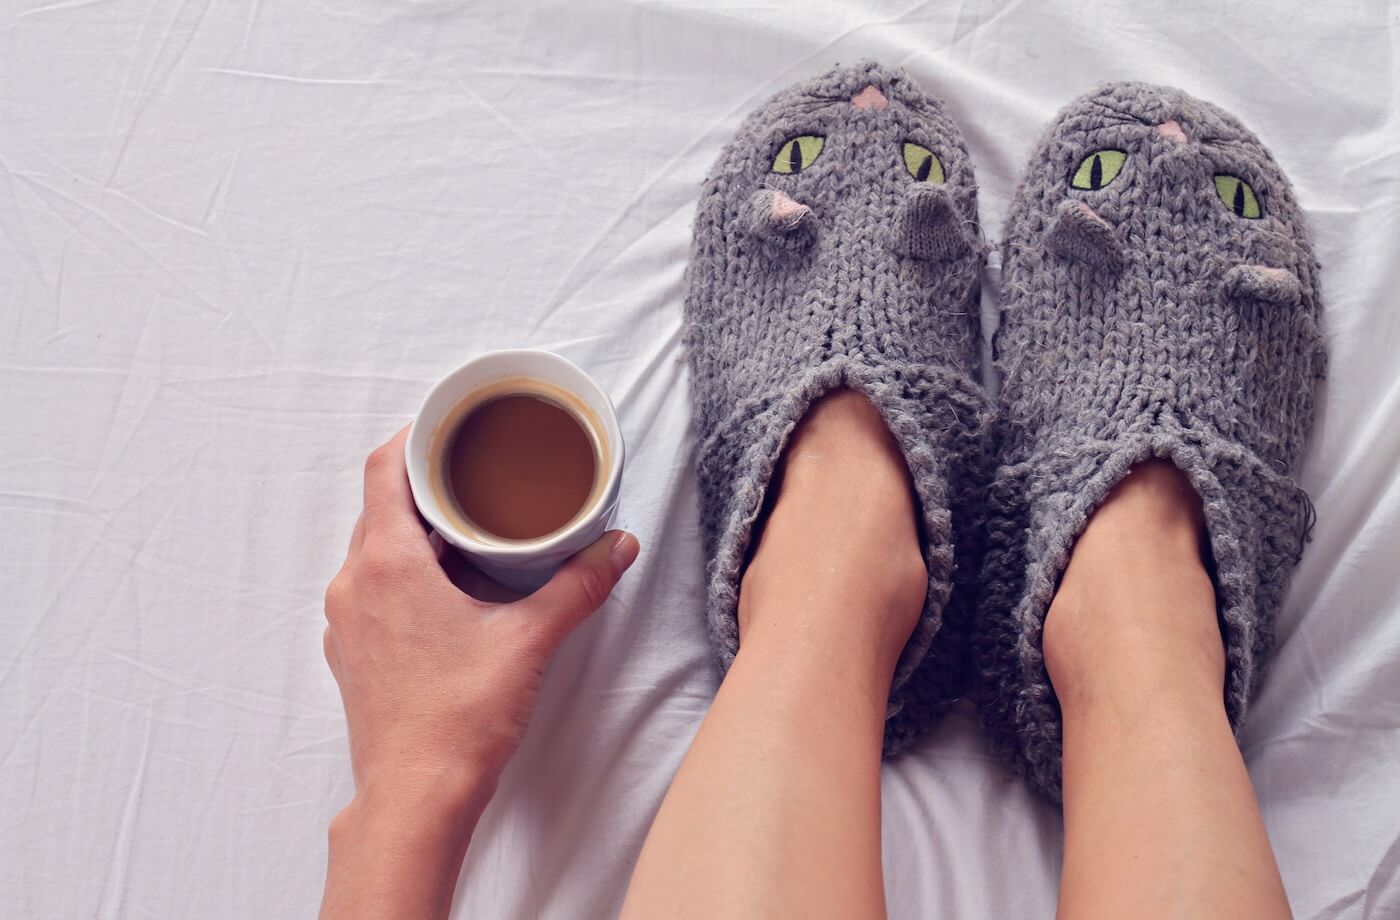 5 Tips to Keeping Your Feet Warm This Winter - Live Enhanced